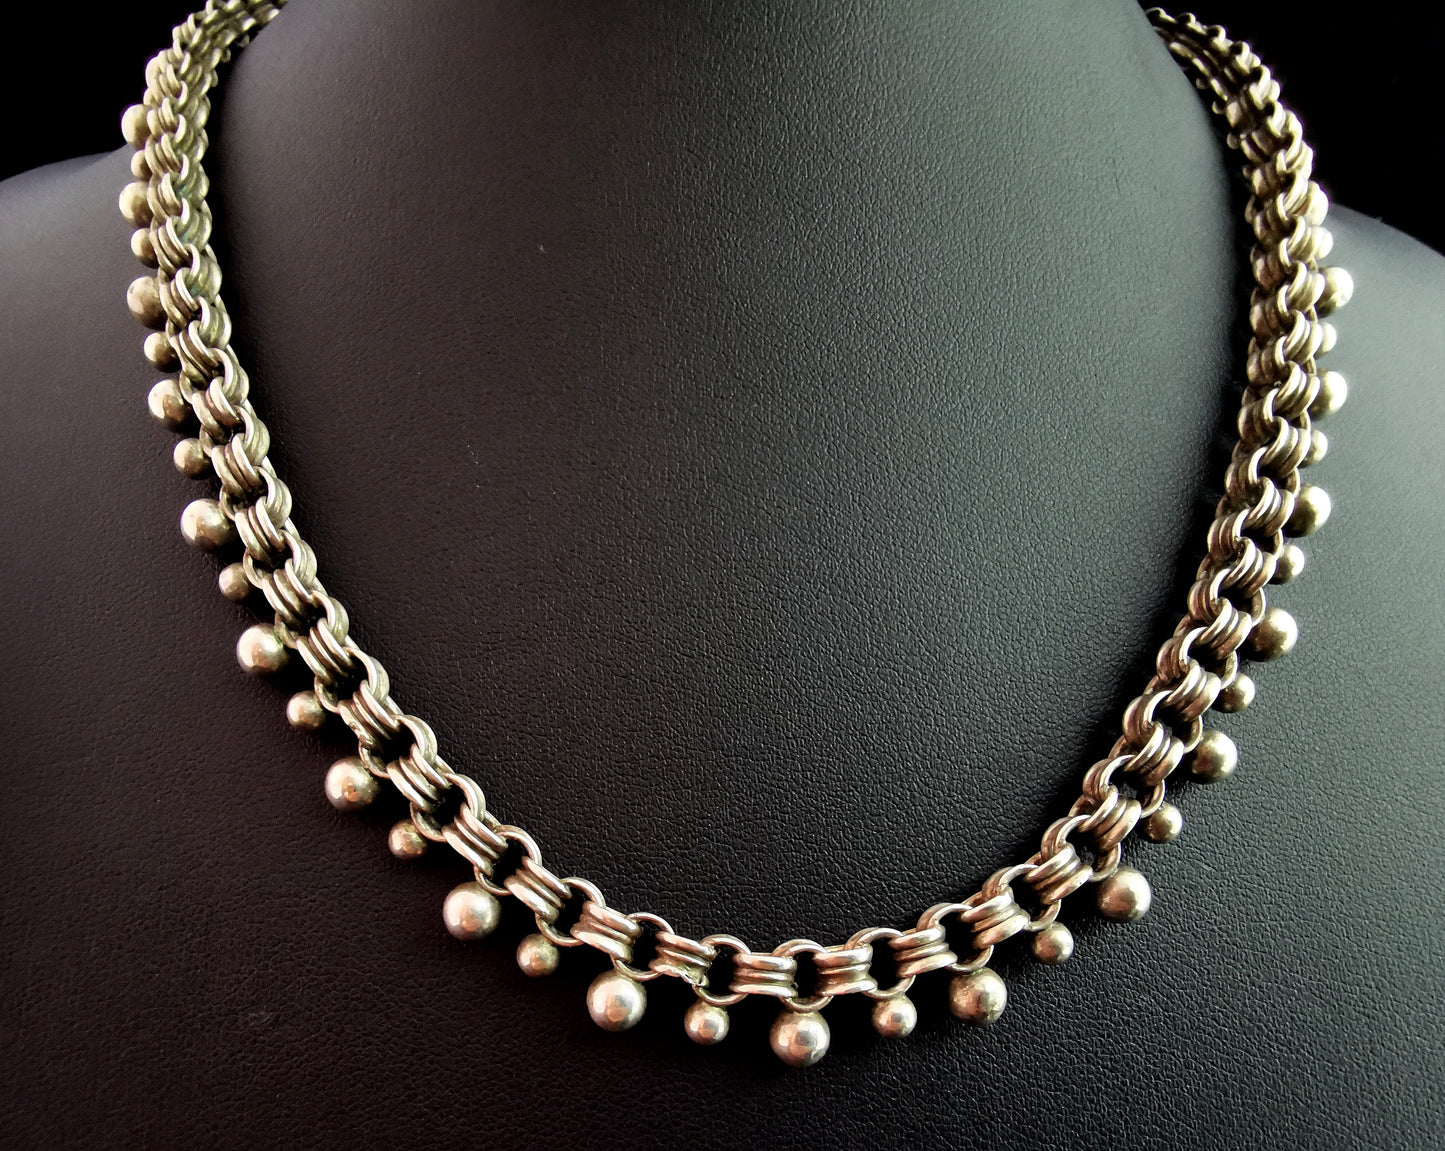 Victorian silver collar necklace, beaded chain